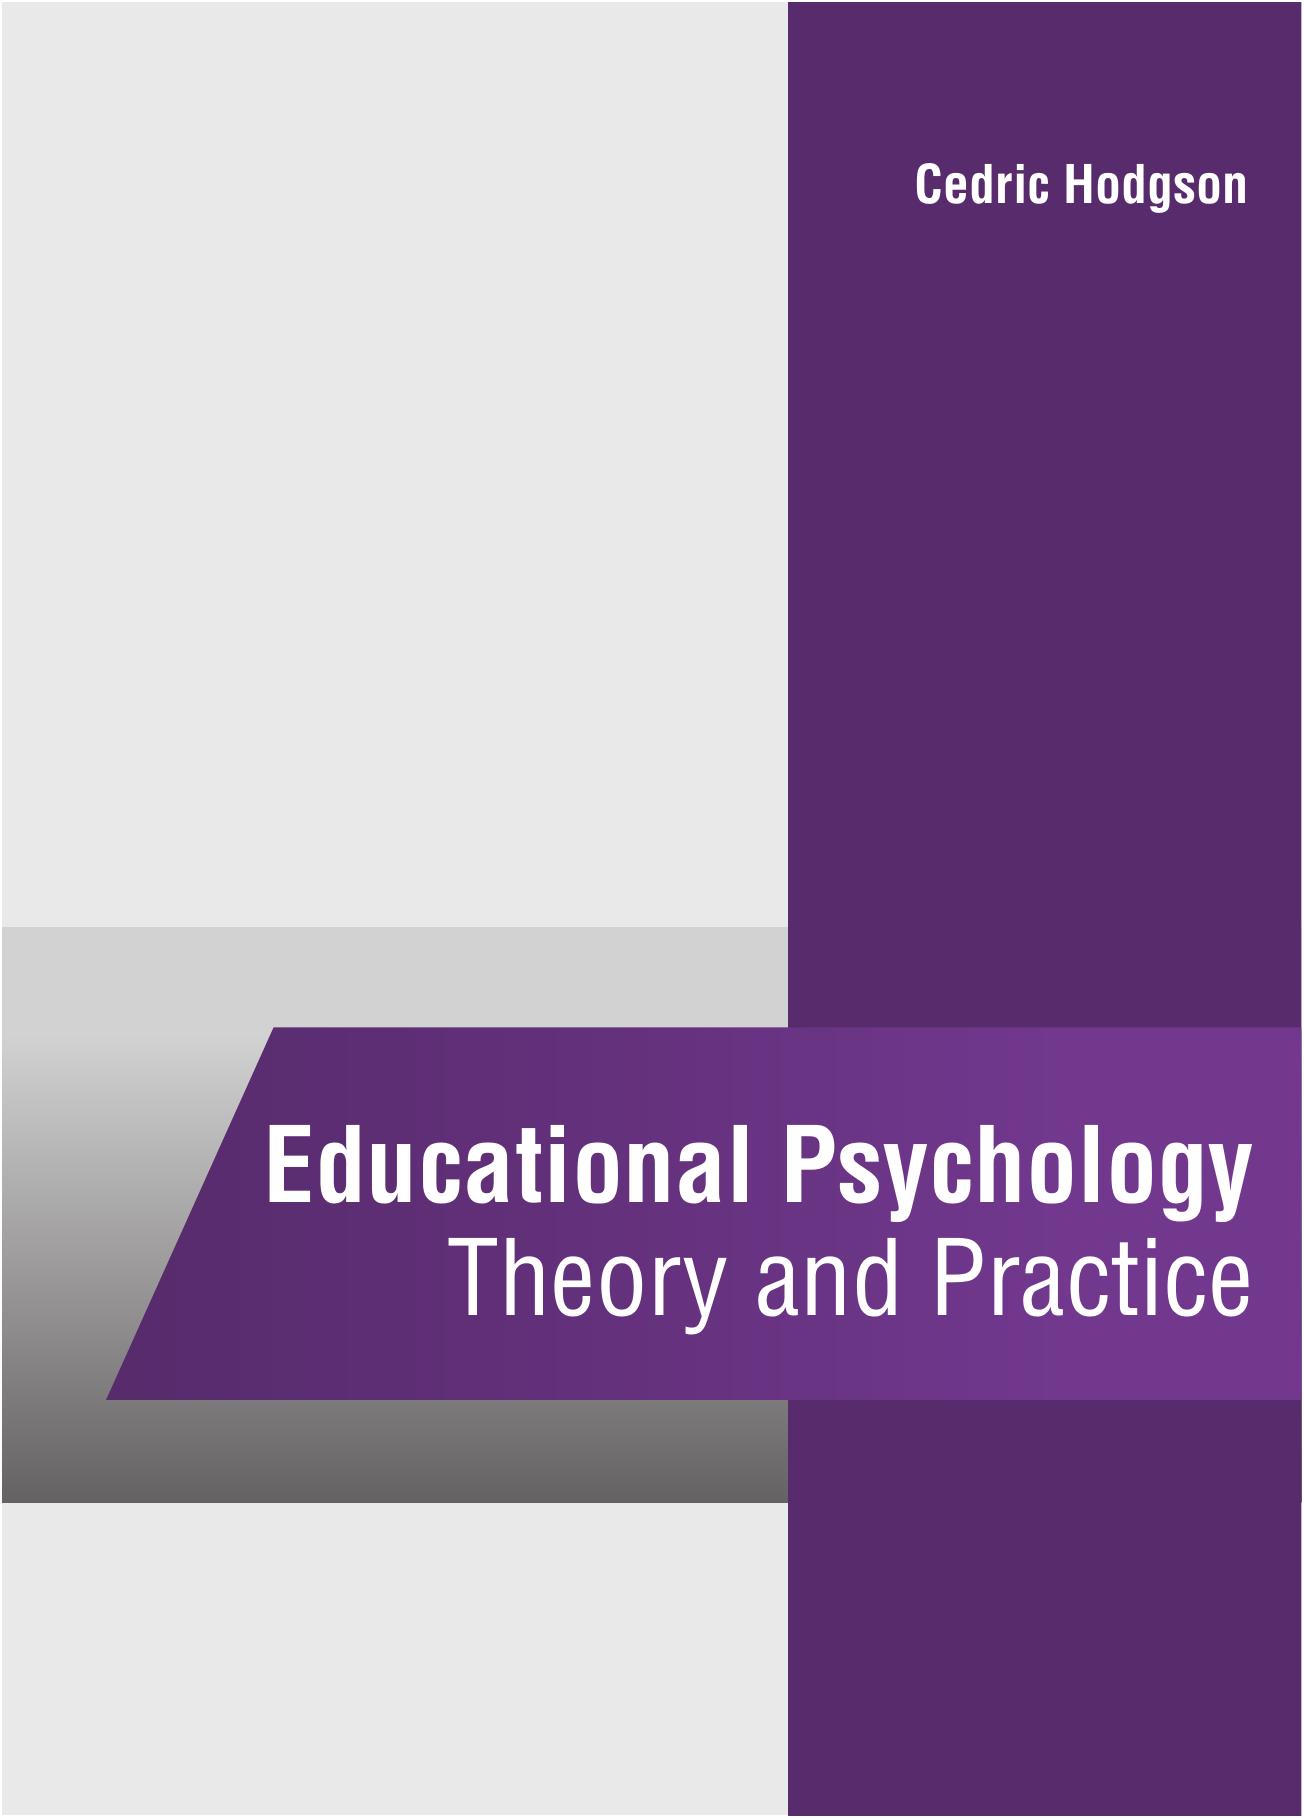 Educational Psychology Theory and Practice 2016